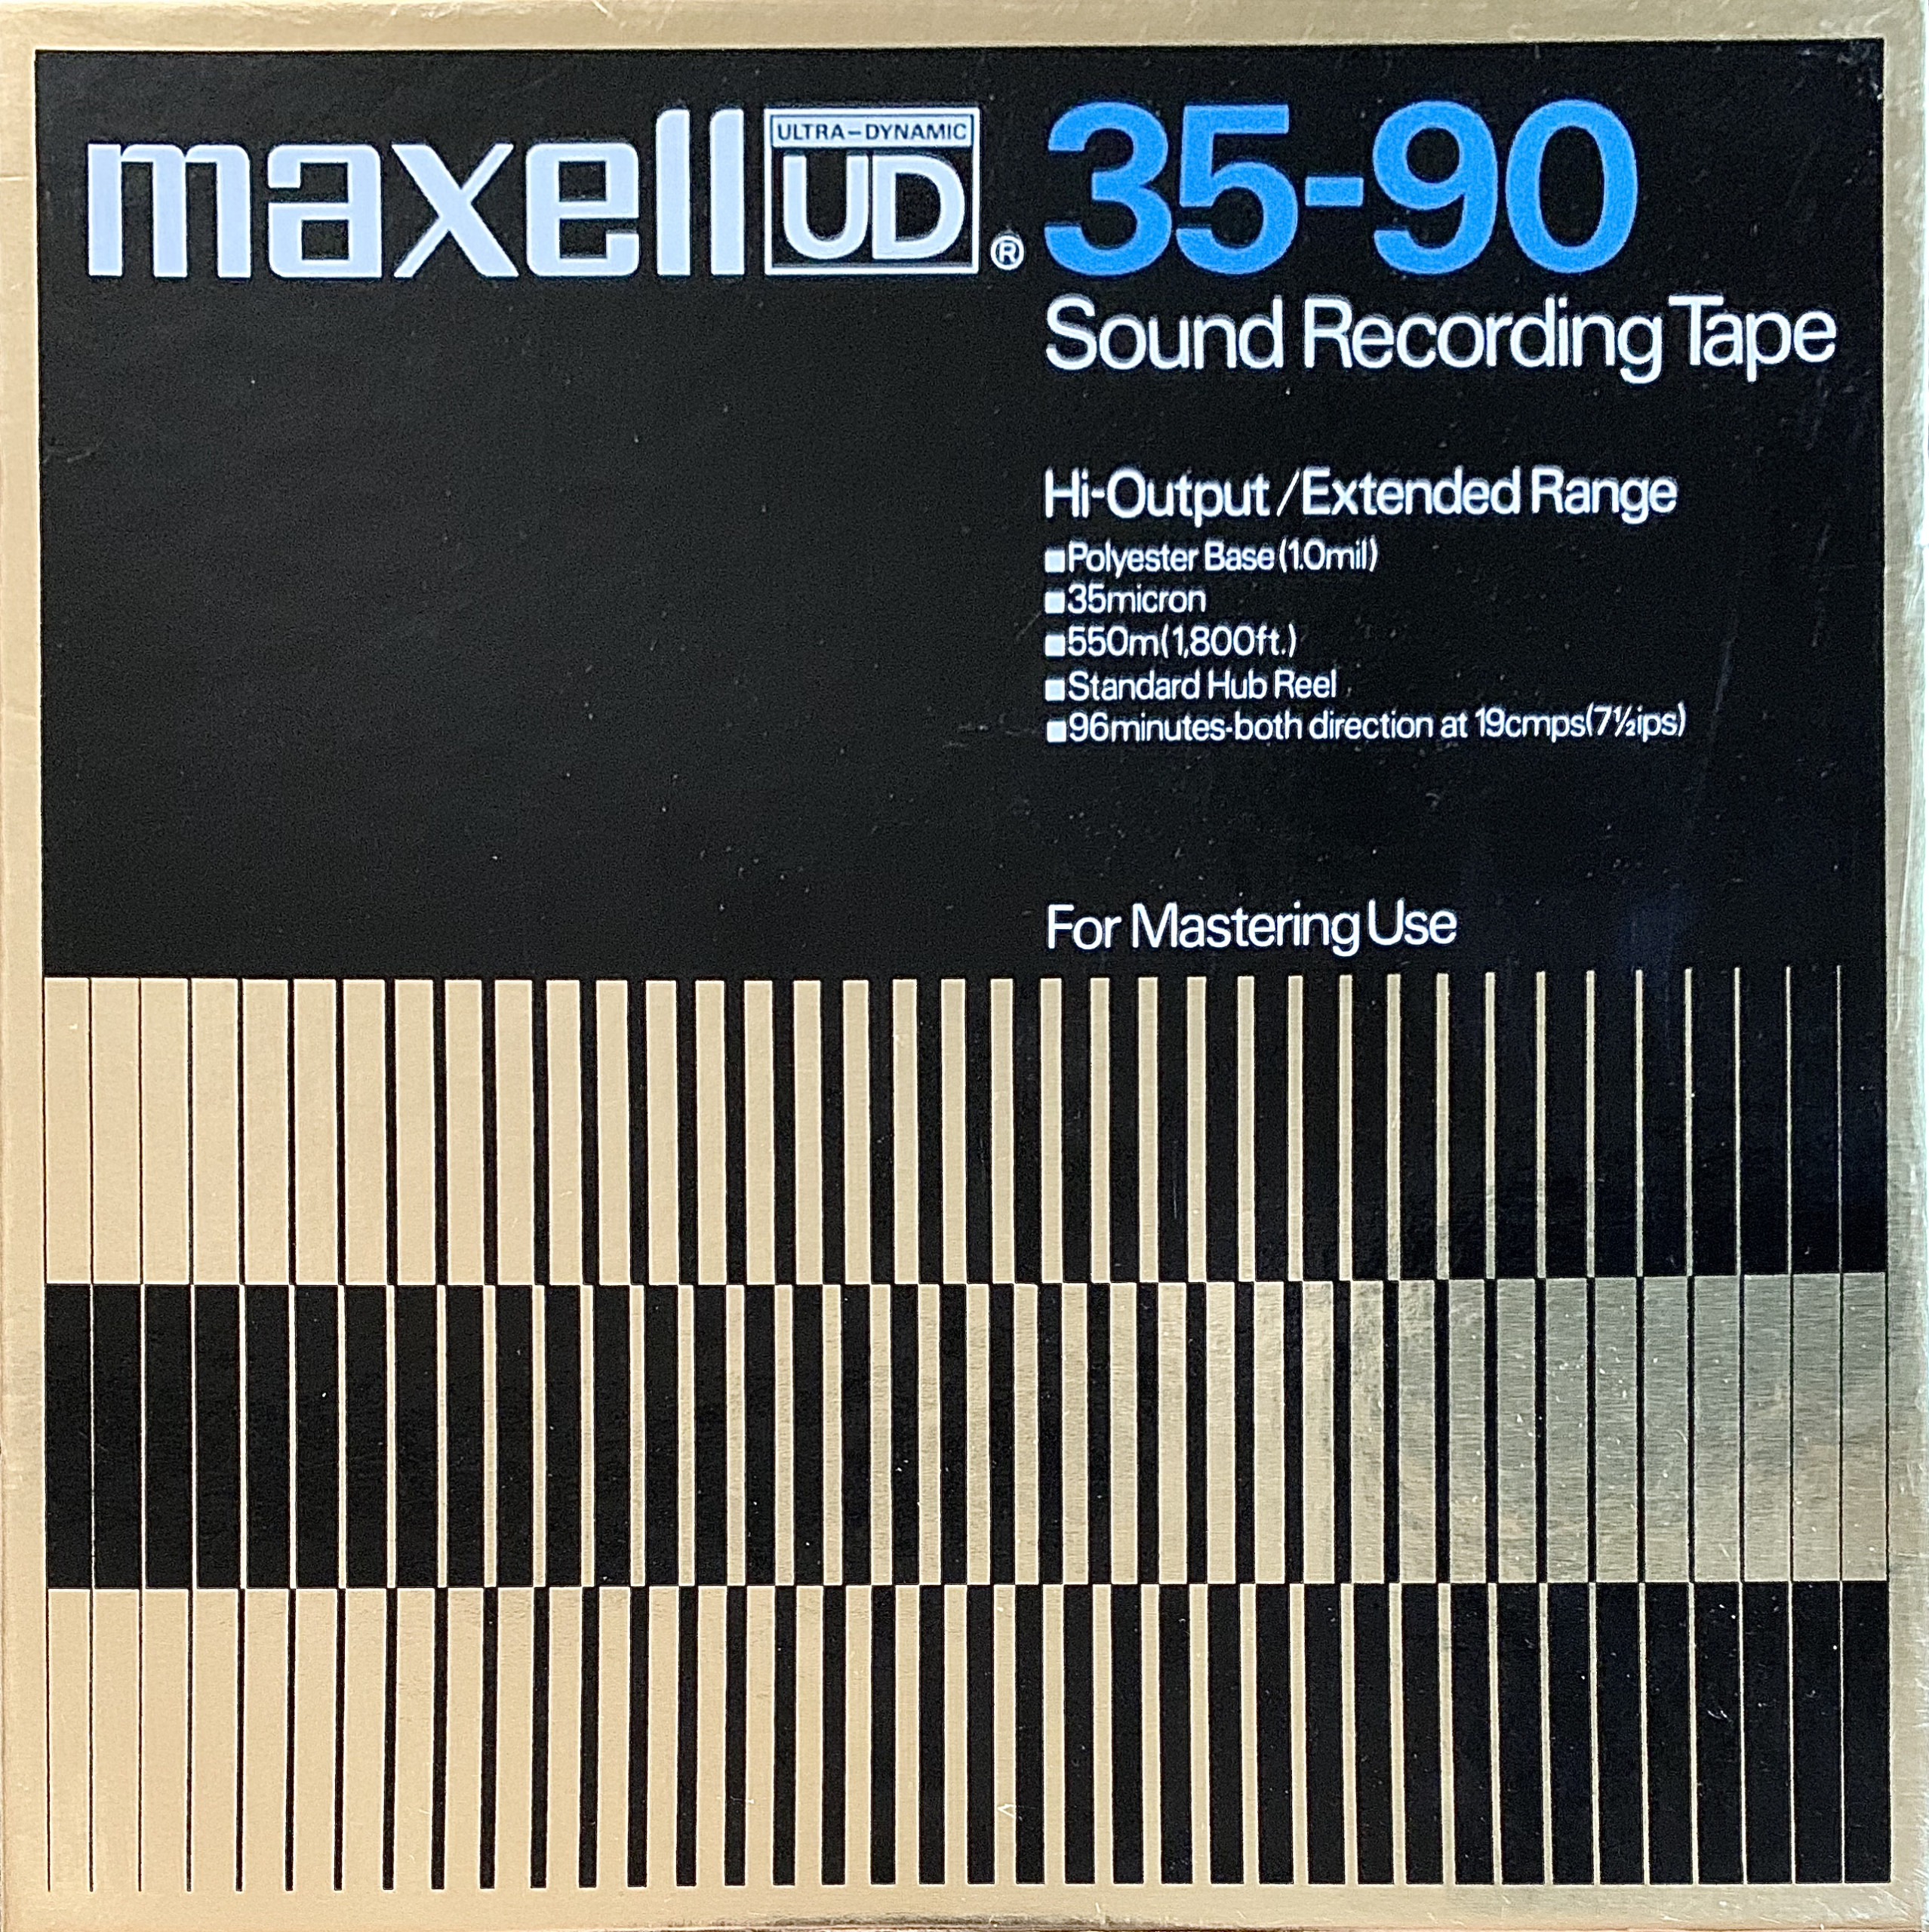 Maxell UD Early Gen Reel to Reel Tape, LP, 7 Reel, 1800 ft, White Box